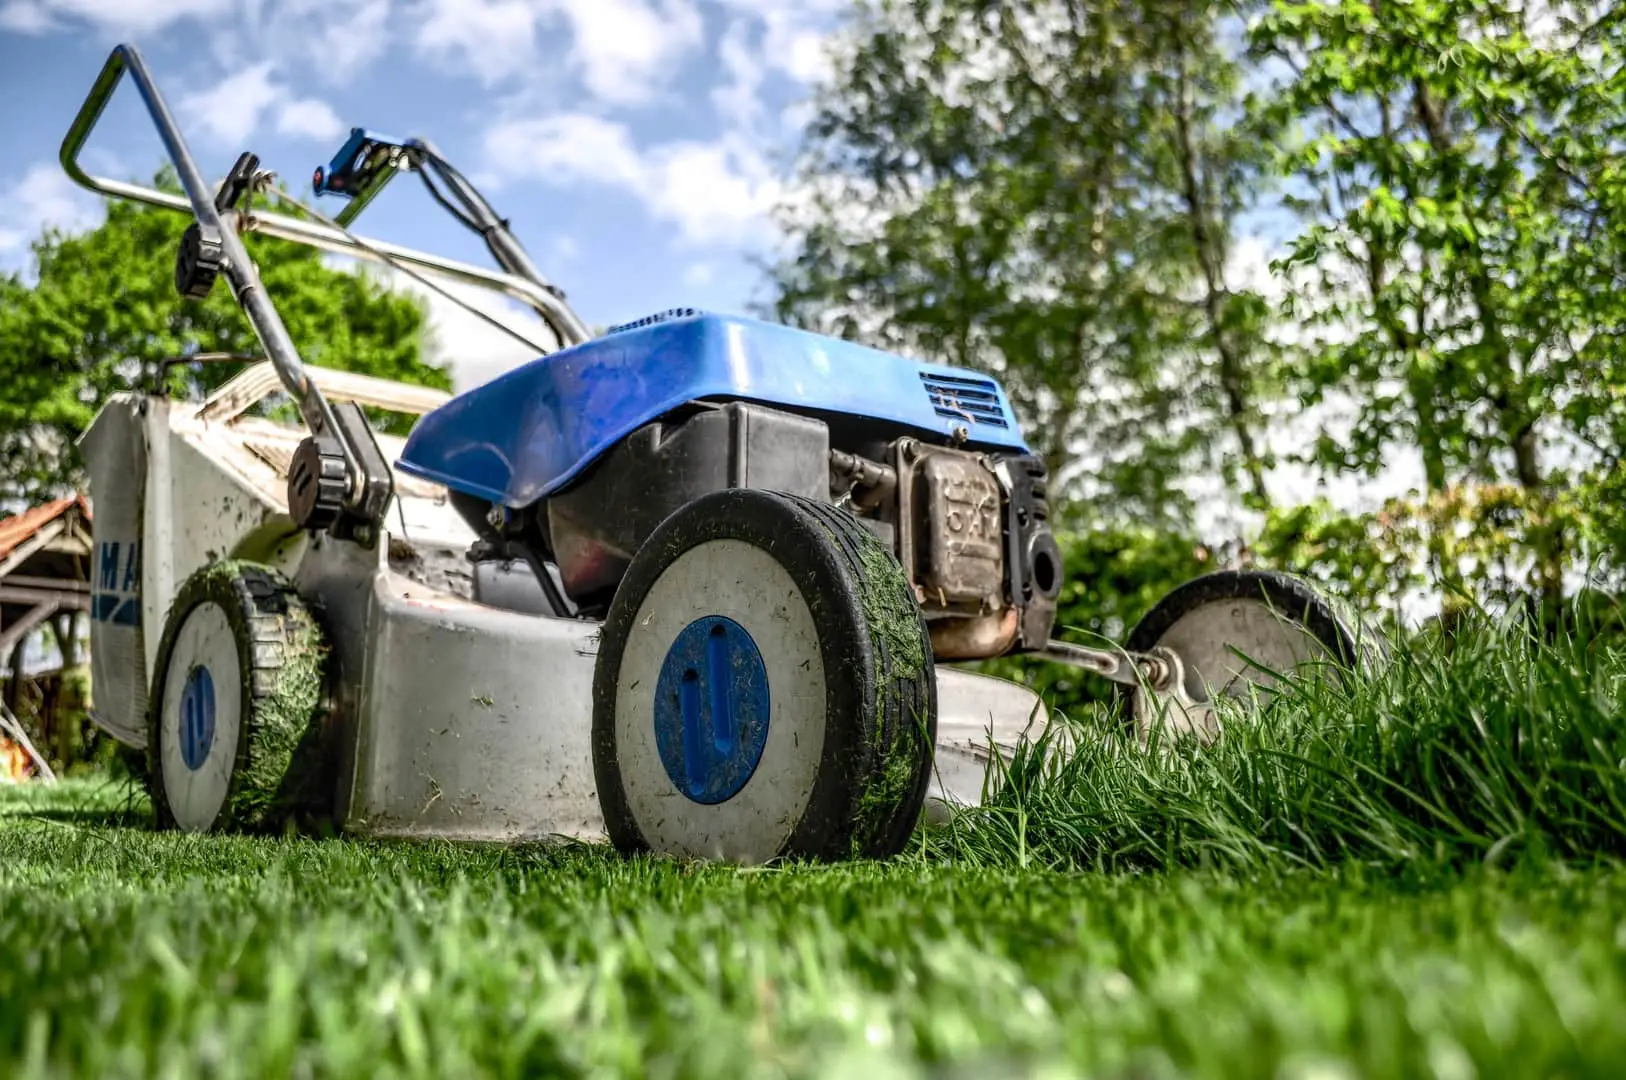 Lawn mower maintenance is necessary to keep your lawn mower running